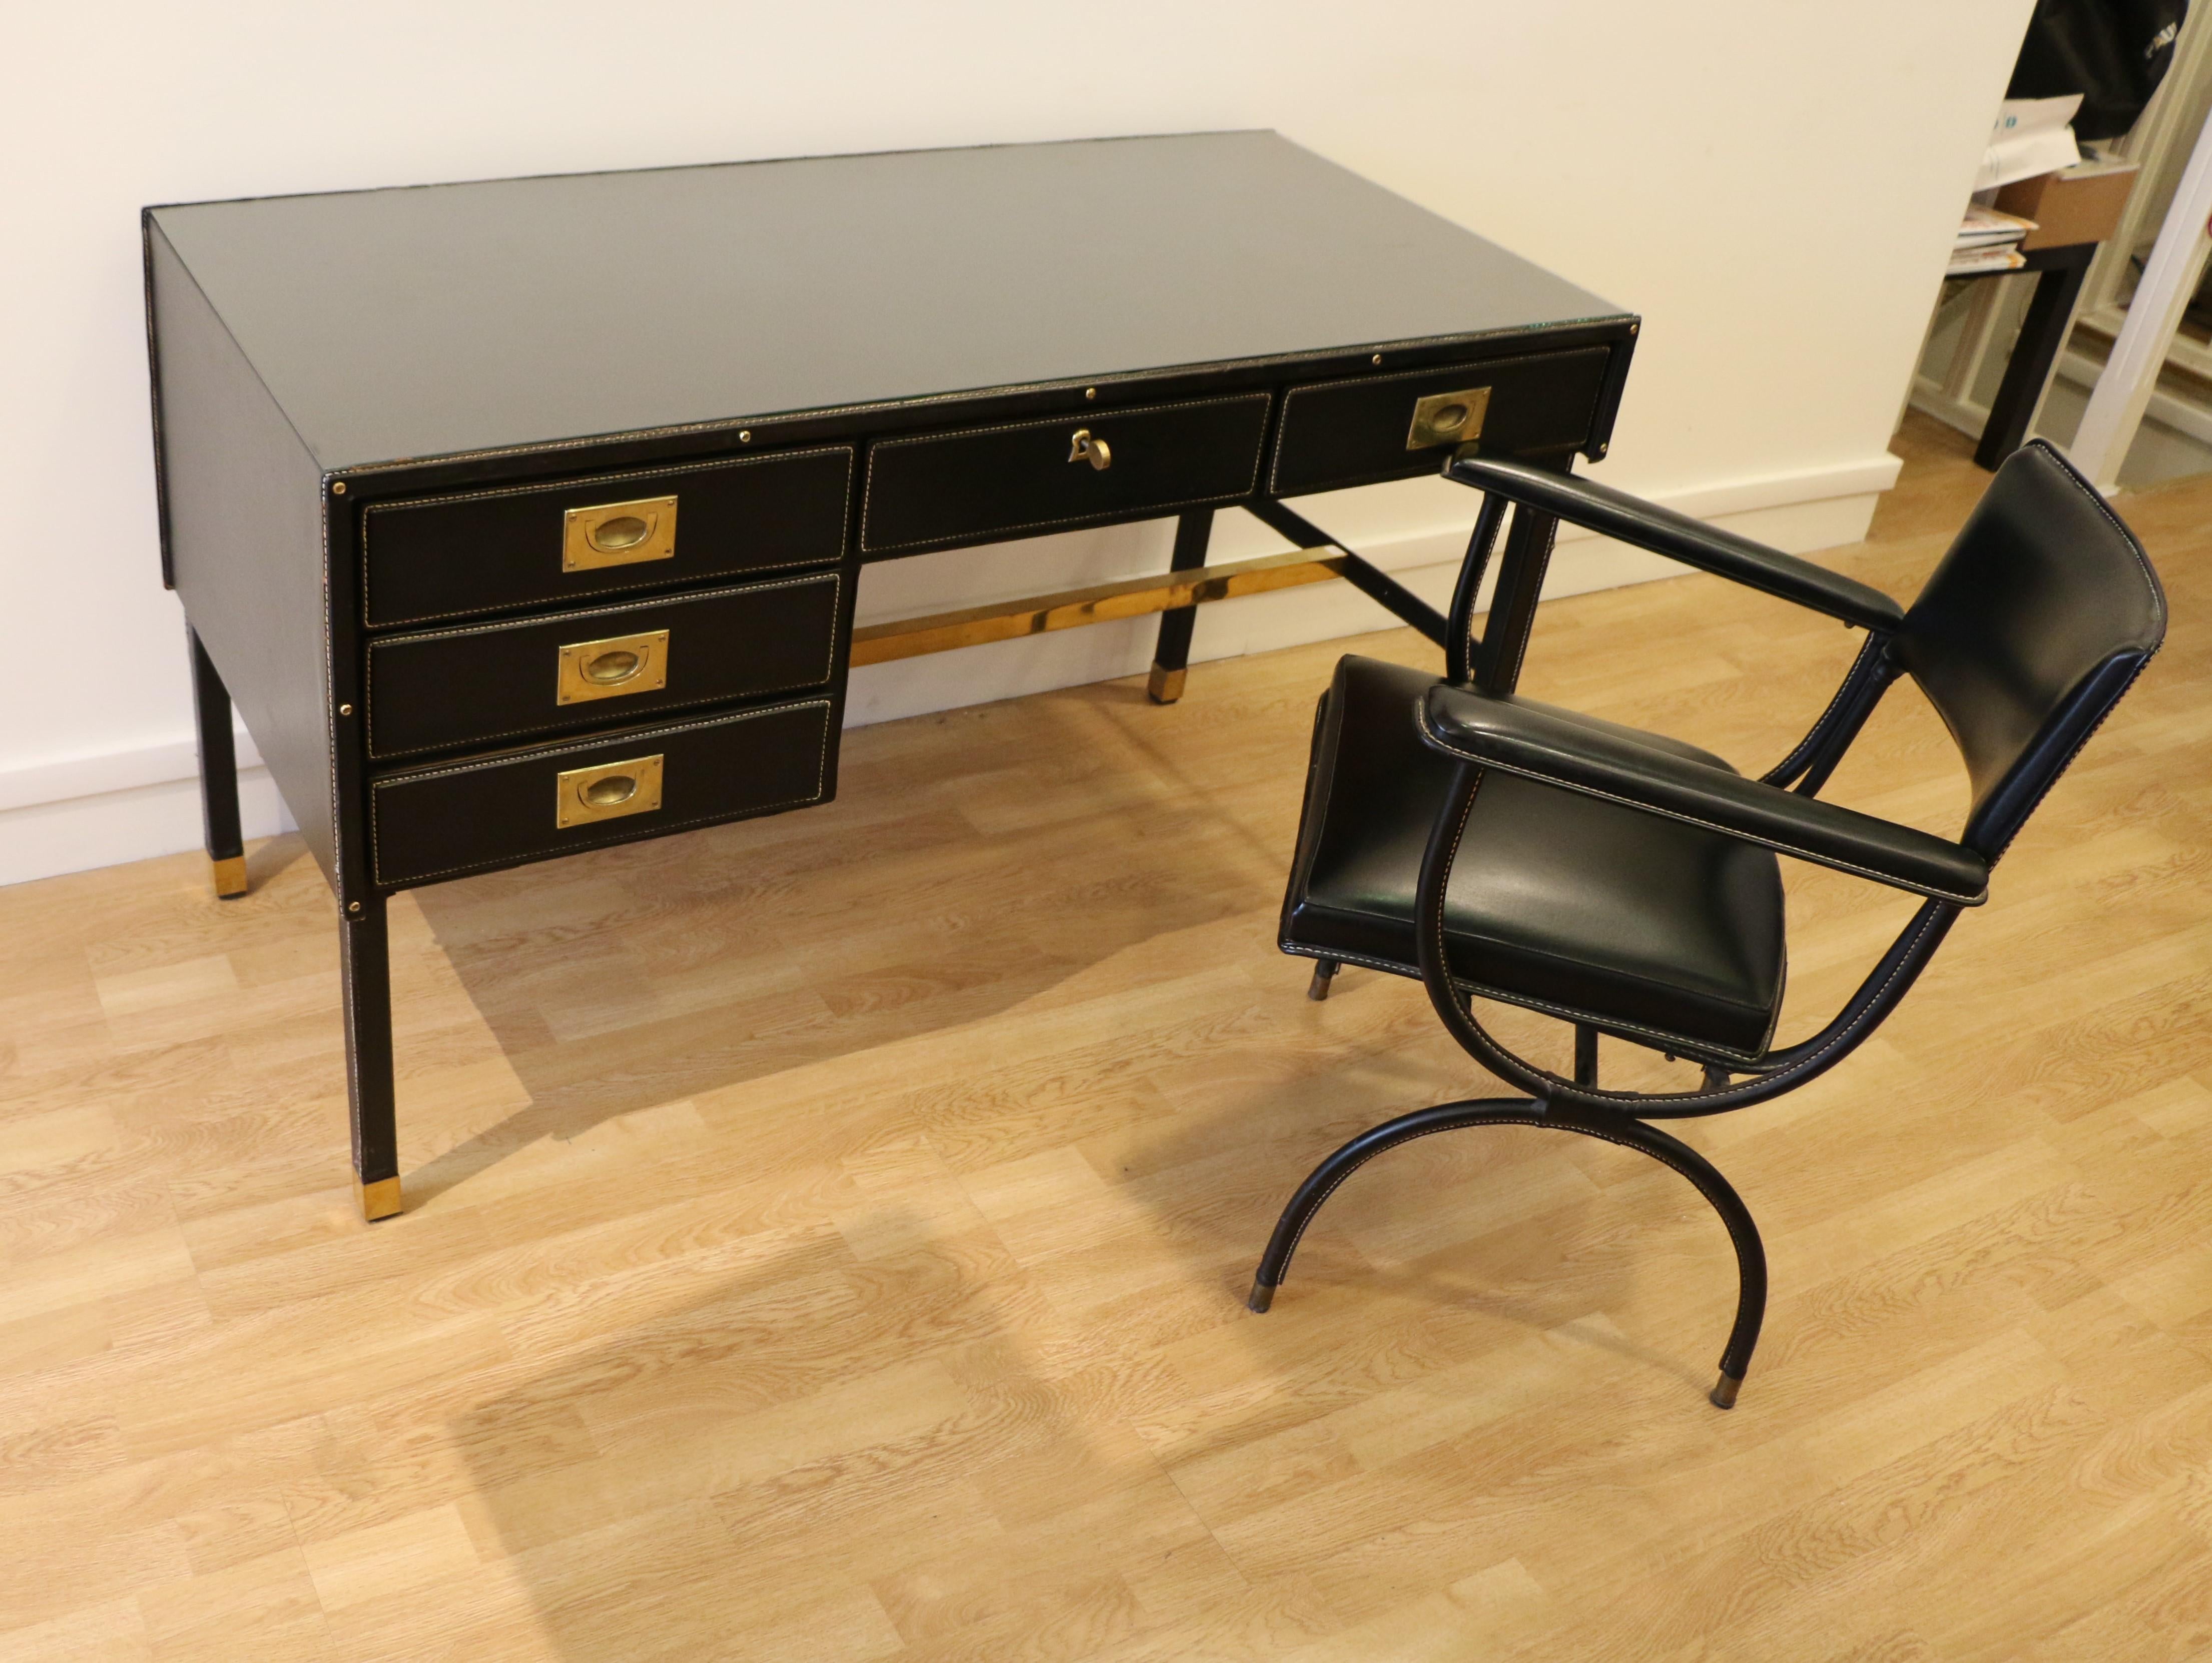 Rare Desk and Armchair by Jacques Adnet, Stitched Leather and Skaï, 1950s For Sale 2